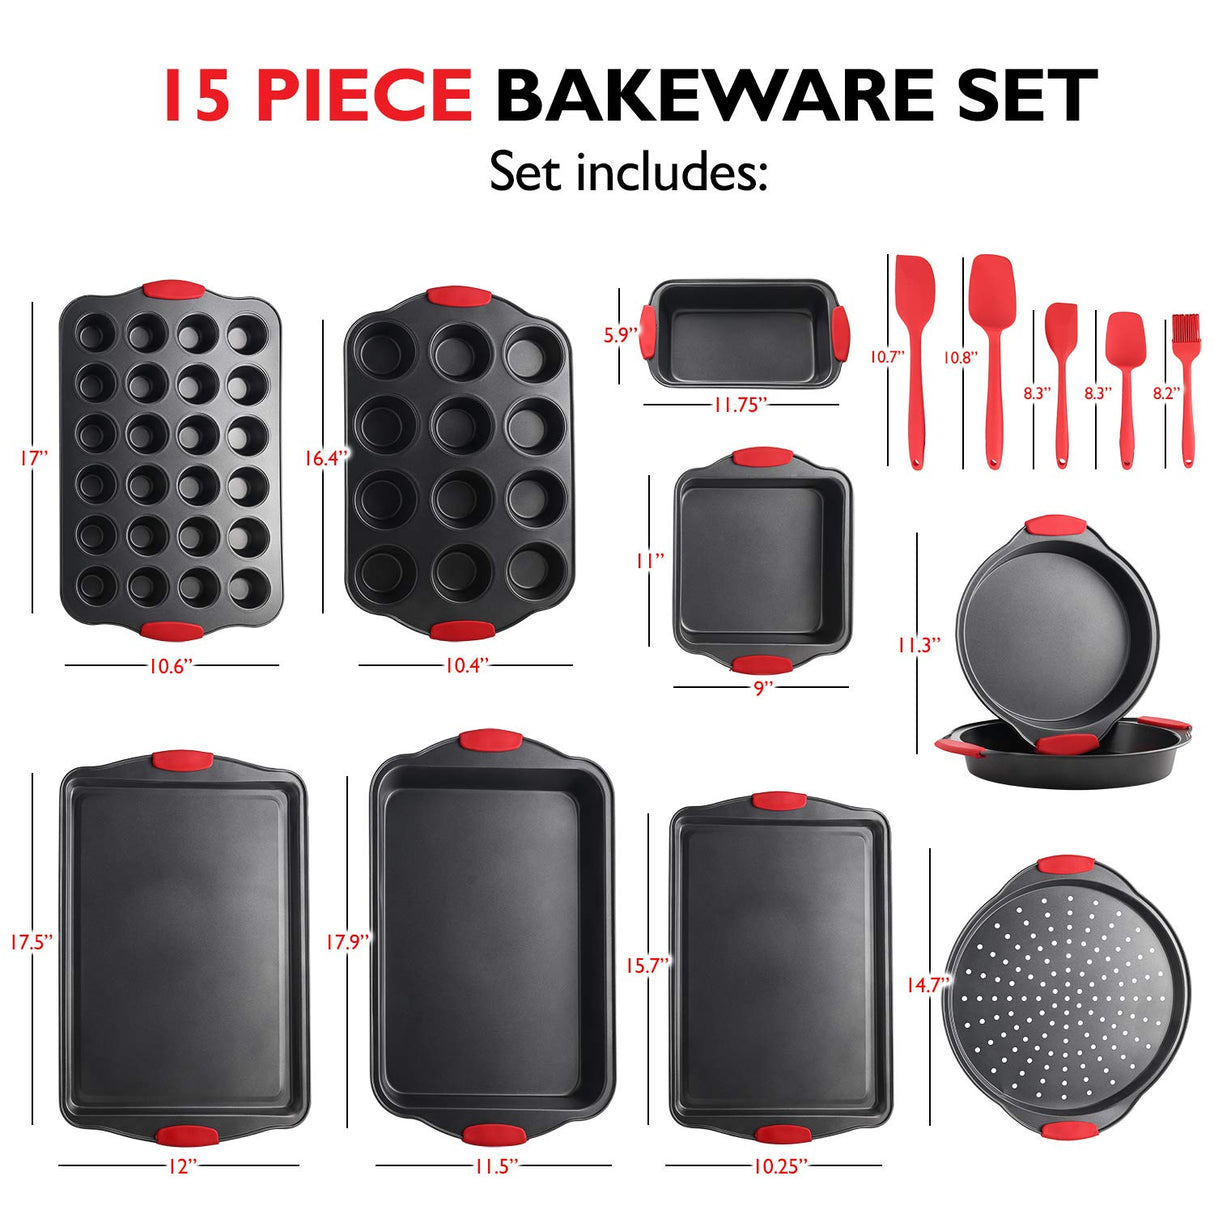 Eatex Nonstick Bakeware Sets with Baking Pans Set, 39 Piece Baking Set with Muffin Pan, Cake Pan & Cookie Sheets for Baking Nonstick Set, Steel Baking Sheets for Oven with Kitchen Utensils Set, Black